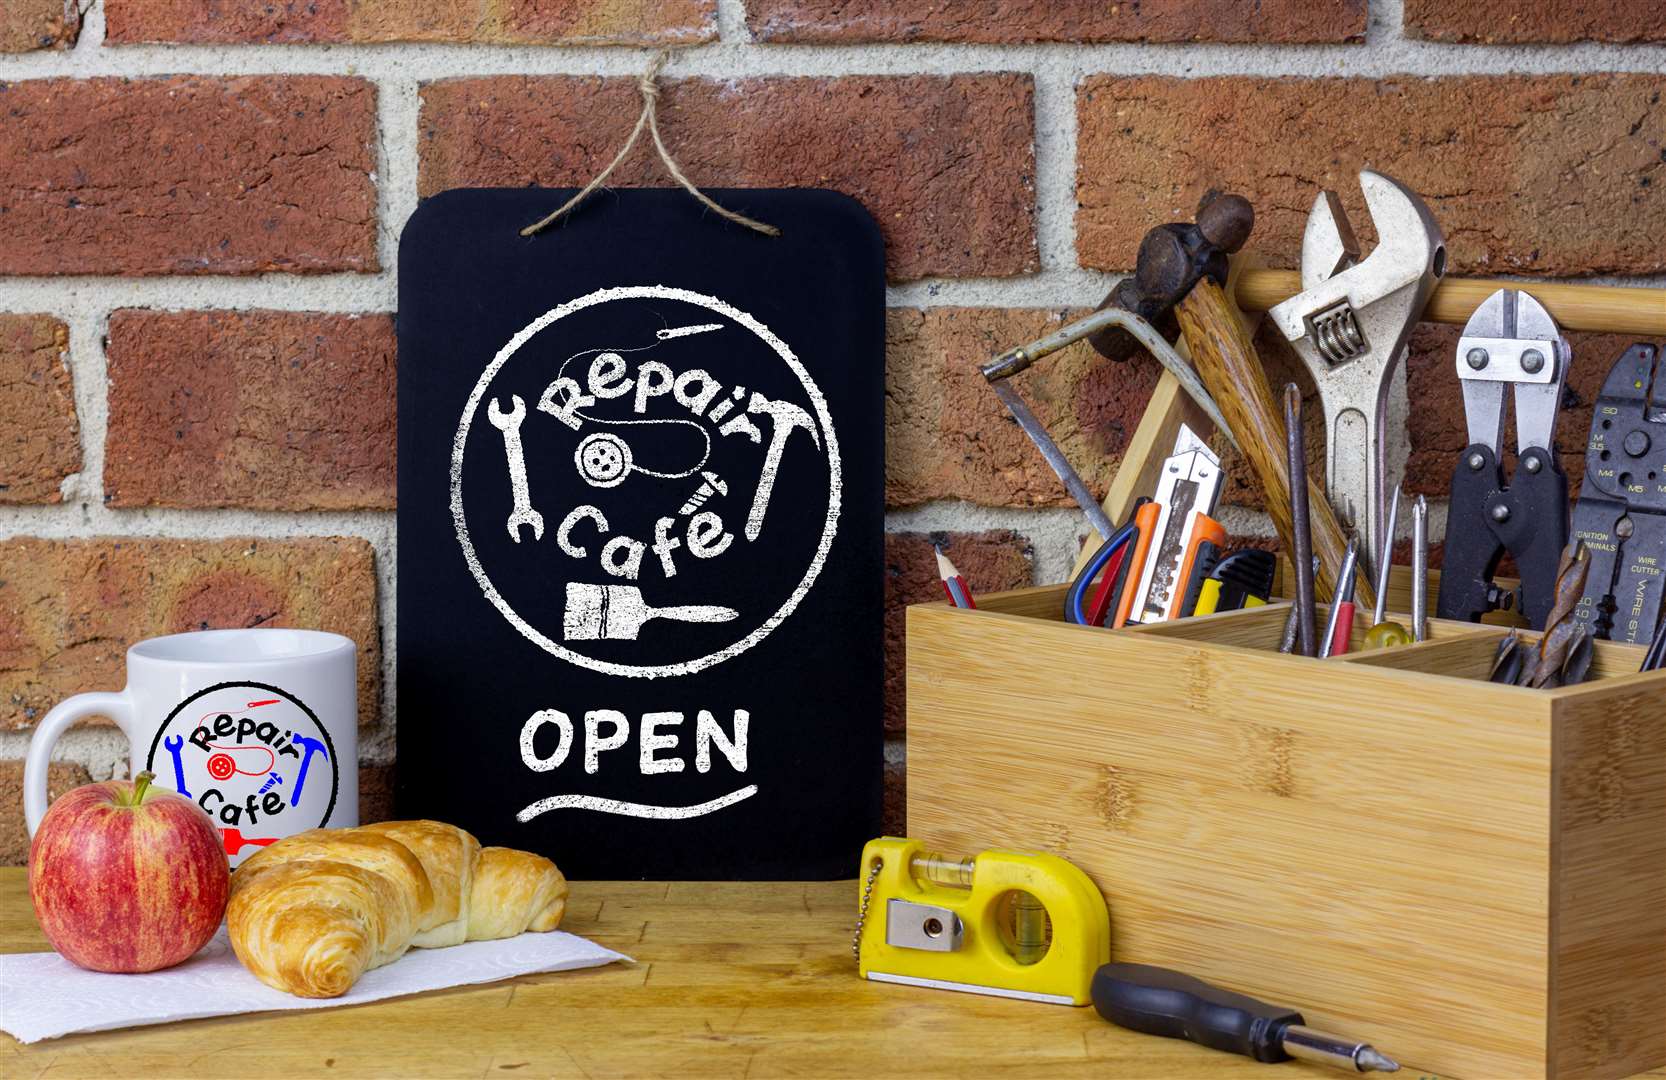 A Repair Cafe is where people meet together with the aim of repairing objects used in everyday life and prevent items going to landfill. Stock Image